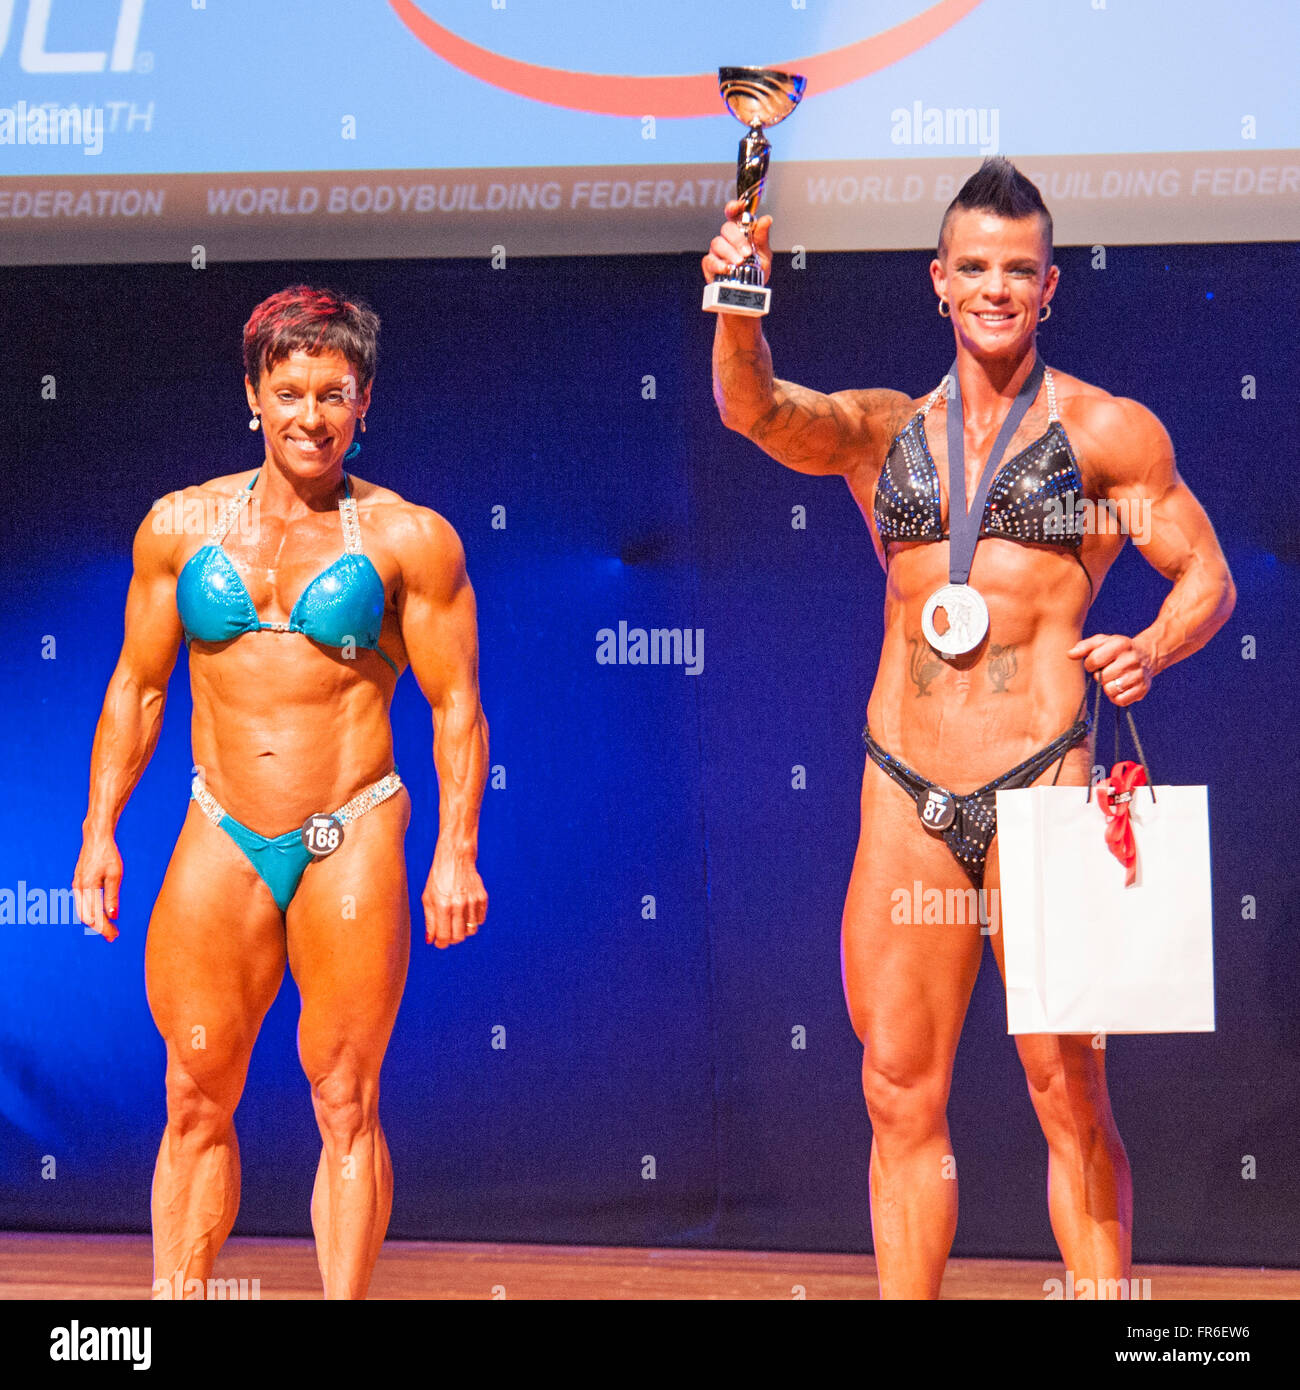 MAASTRICHT, THE NETHERLANDS - OCTOBER 25, 2015: Female bodybuilders Michèle Steenhaut and Cinneke Limpens celebrate victory Stock Photo